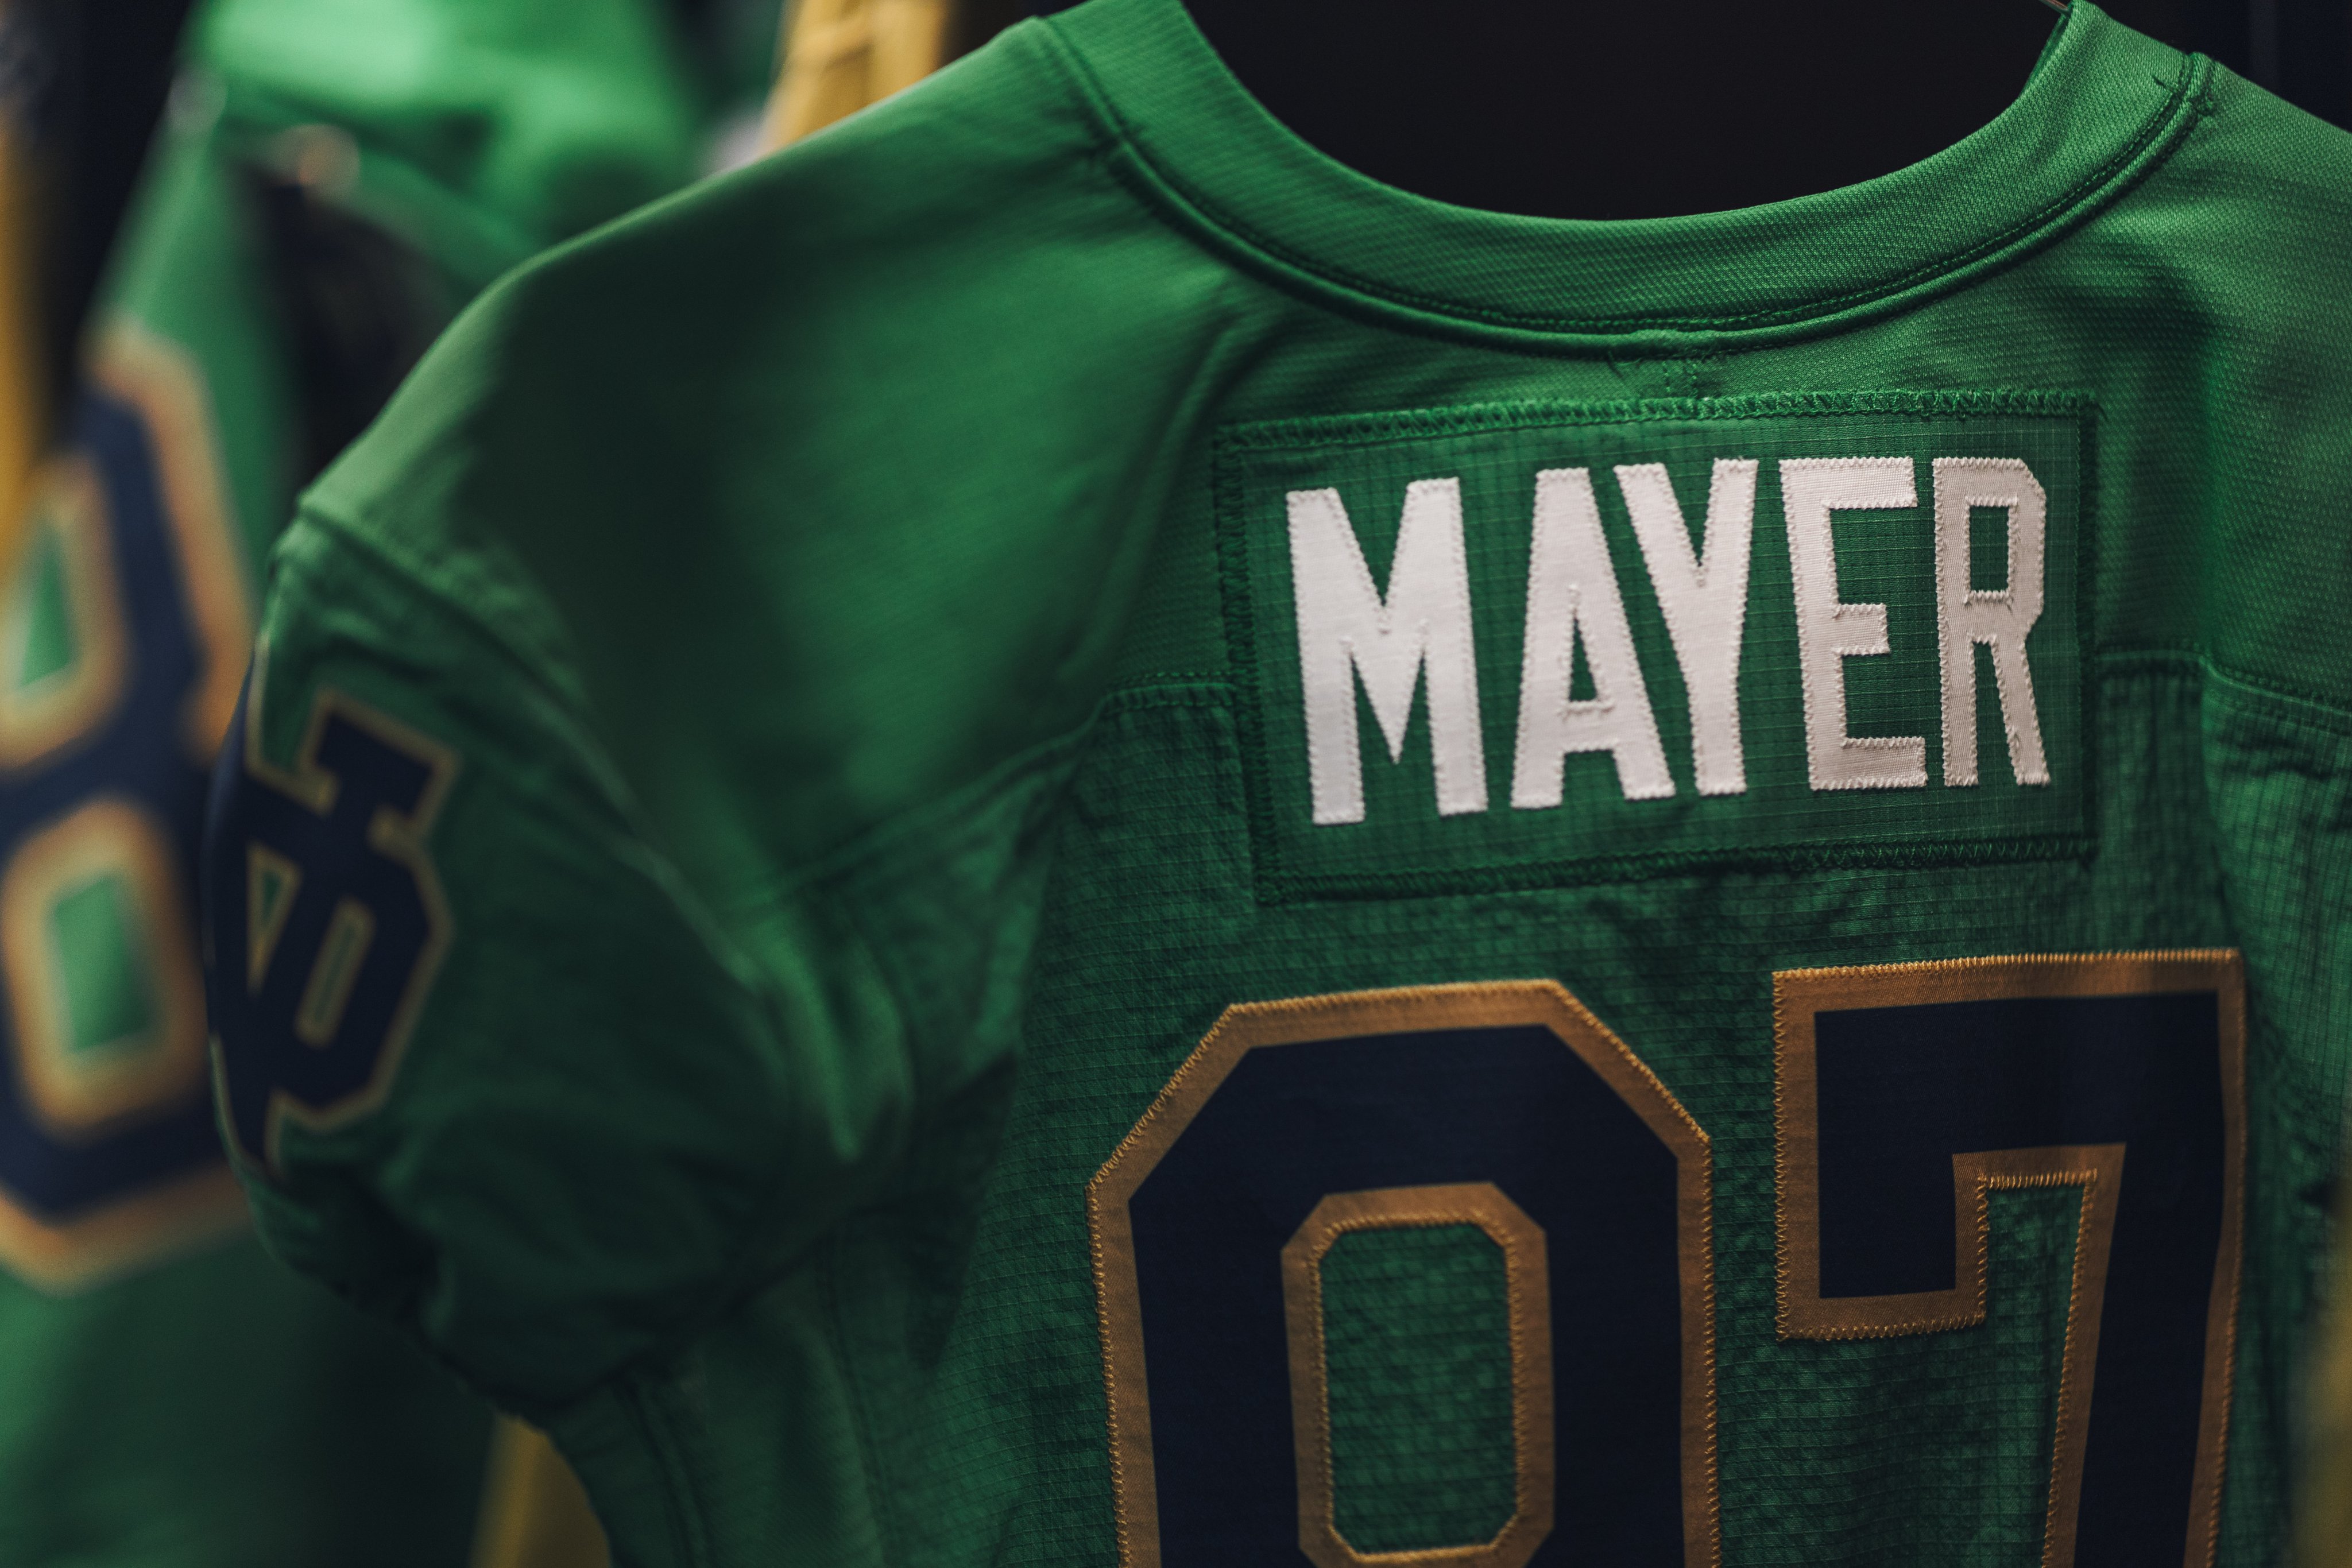 Notre Dame teases wearing green jerseys at home for first time